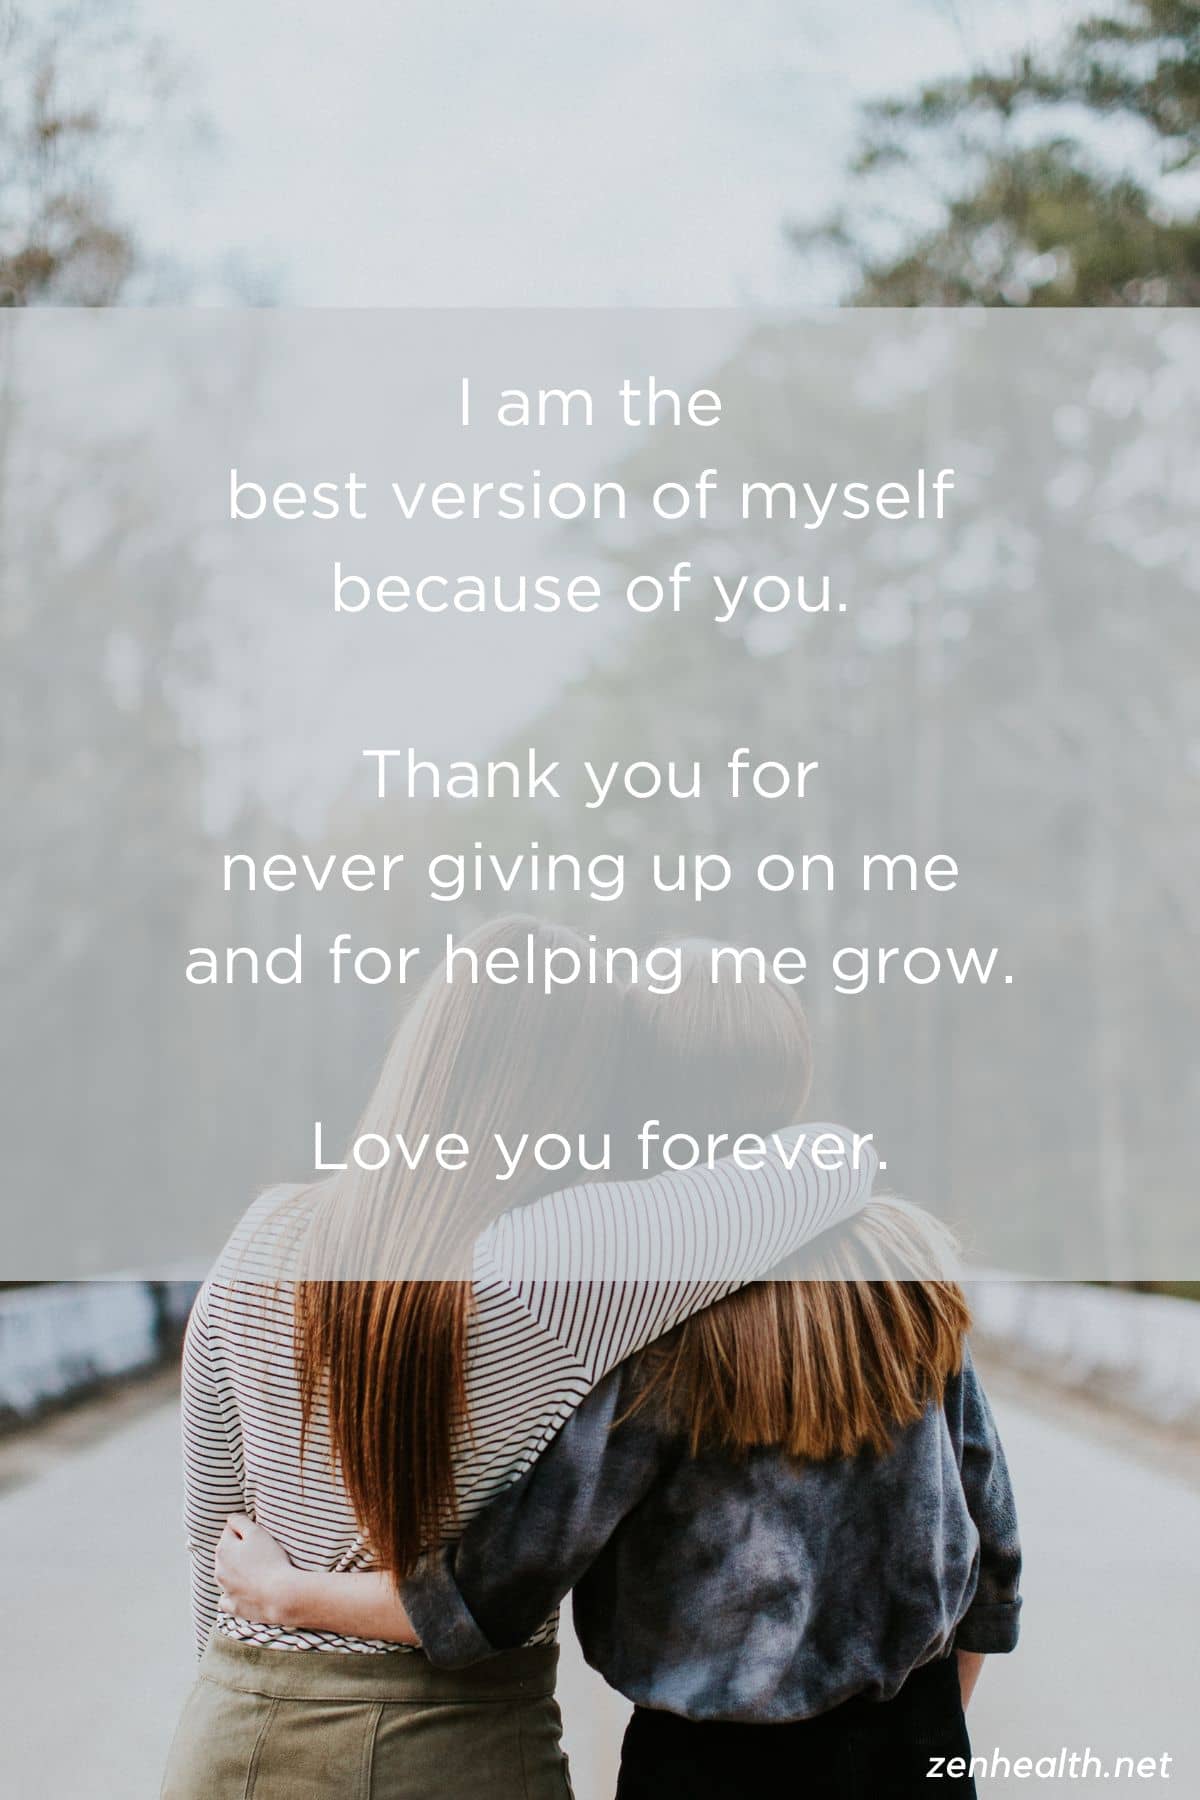 "I am the best version of myself because of you. Thank you for never giving up on me and for helping me grow. Love you forever" text overlaid on two women hugging